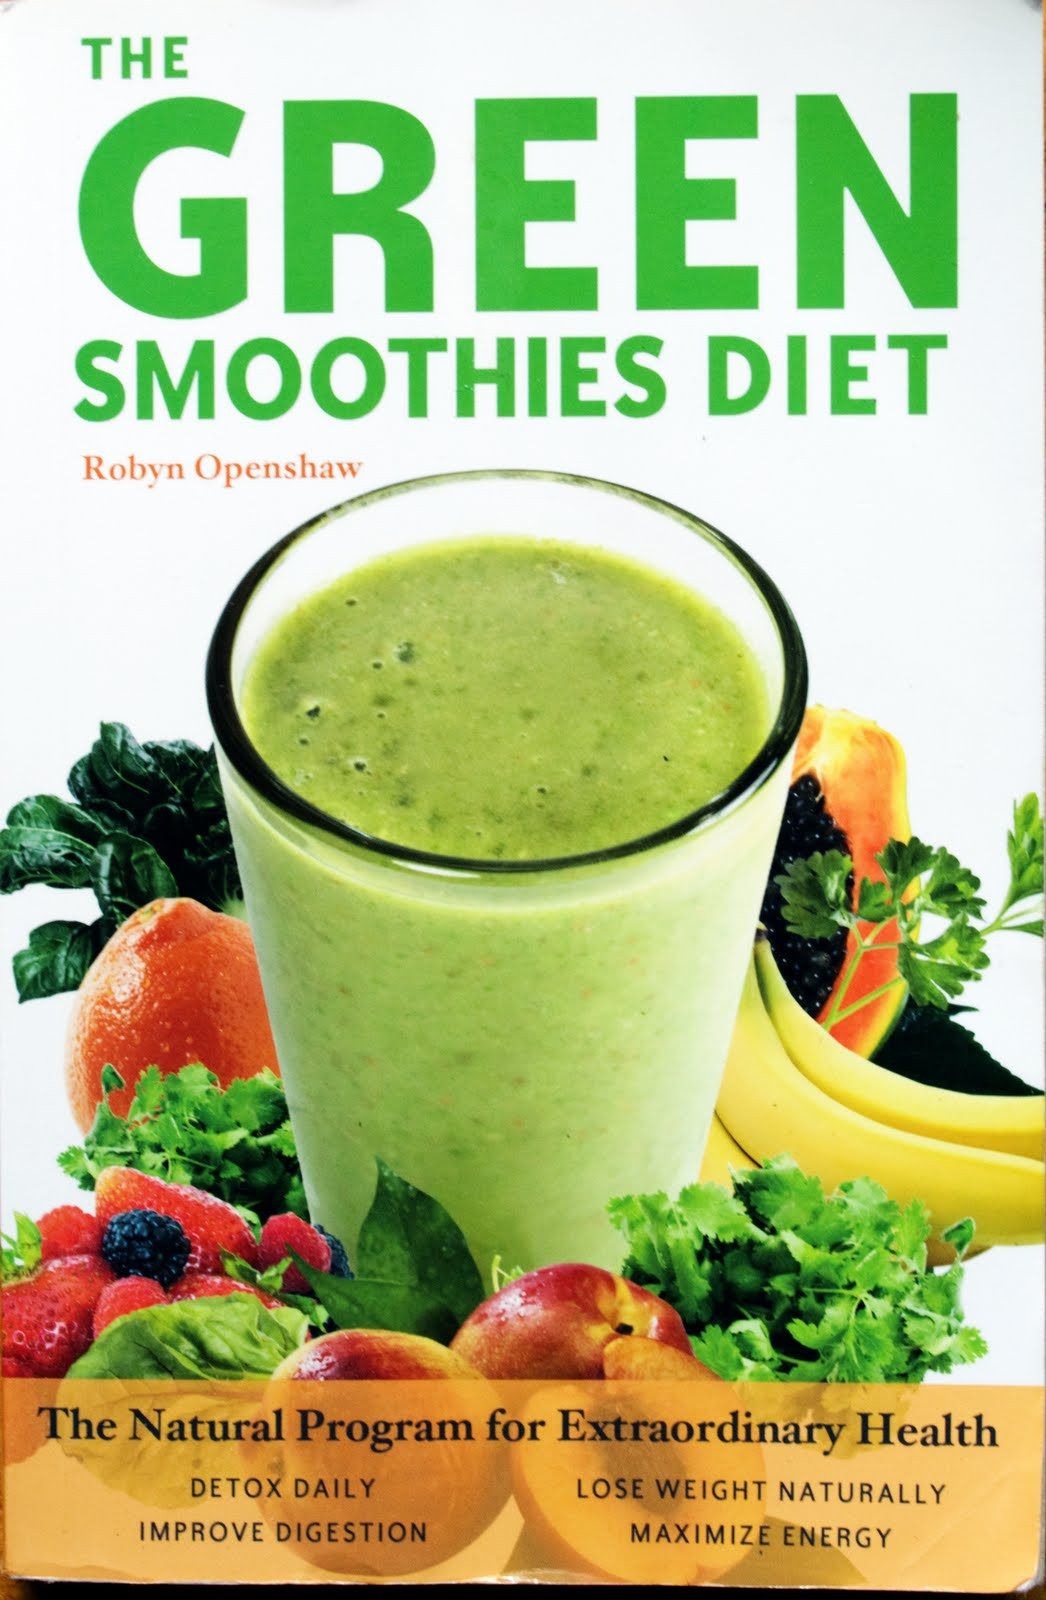 Are Green Smoothies Healthy
 Anti Cancer Green Smoothie & Jane Dalton Story on Healthy